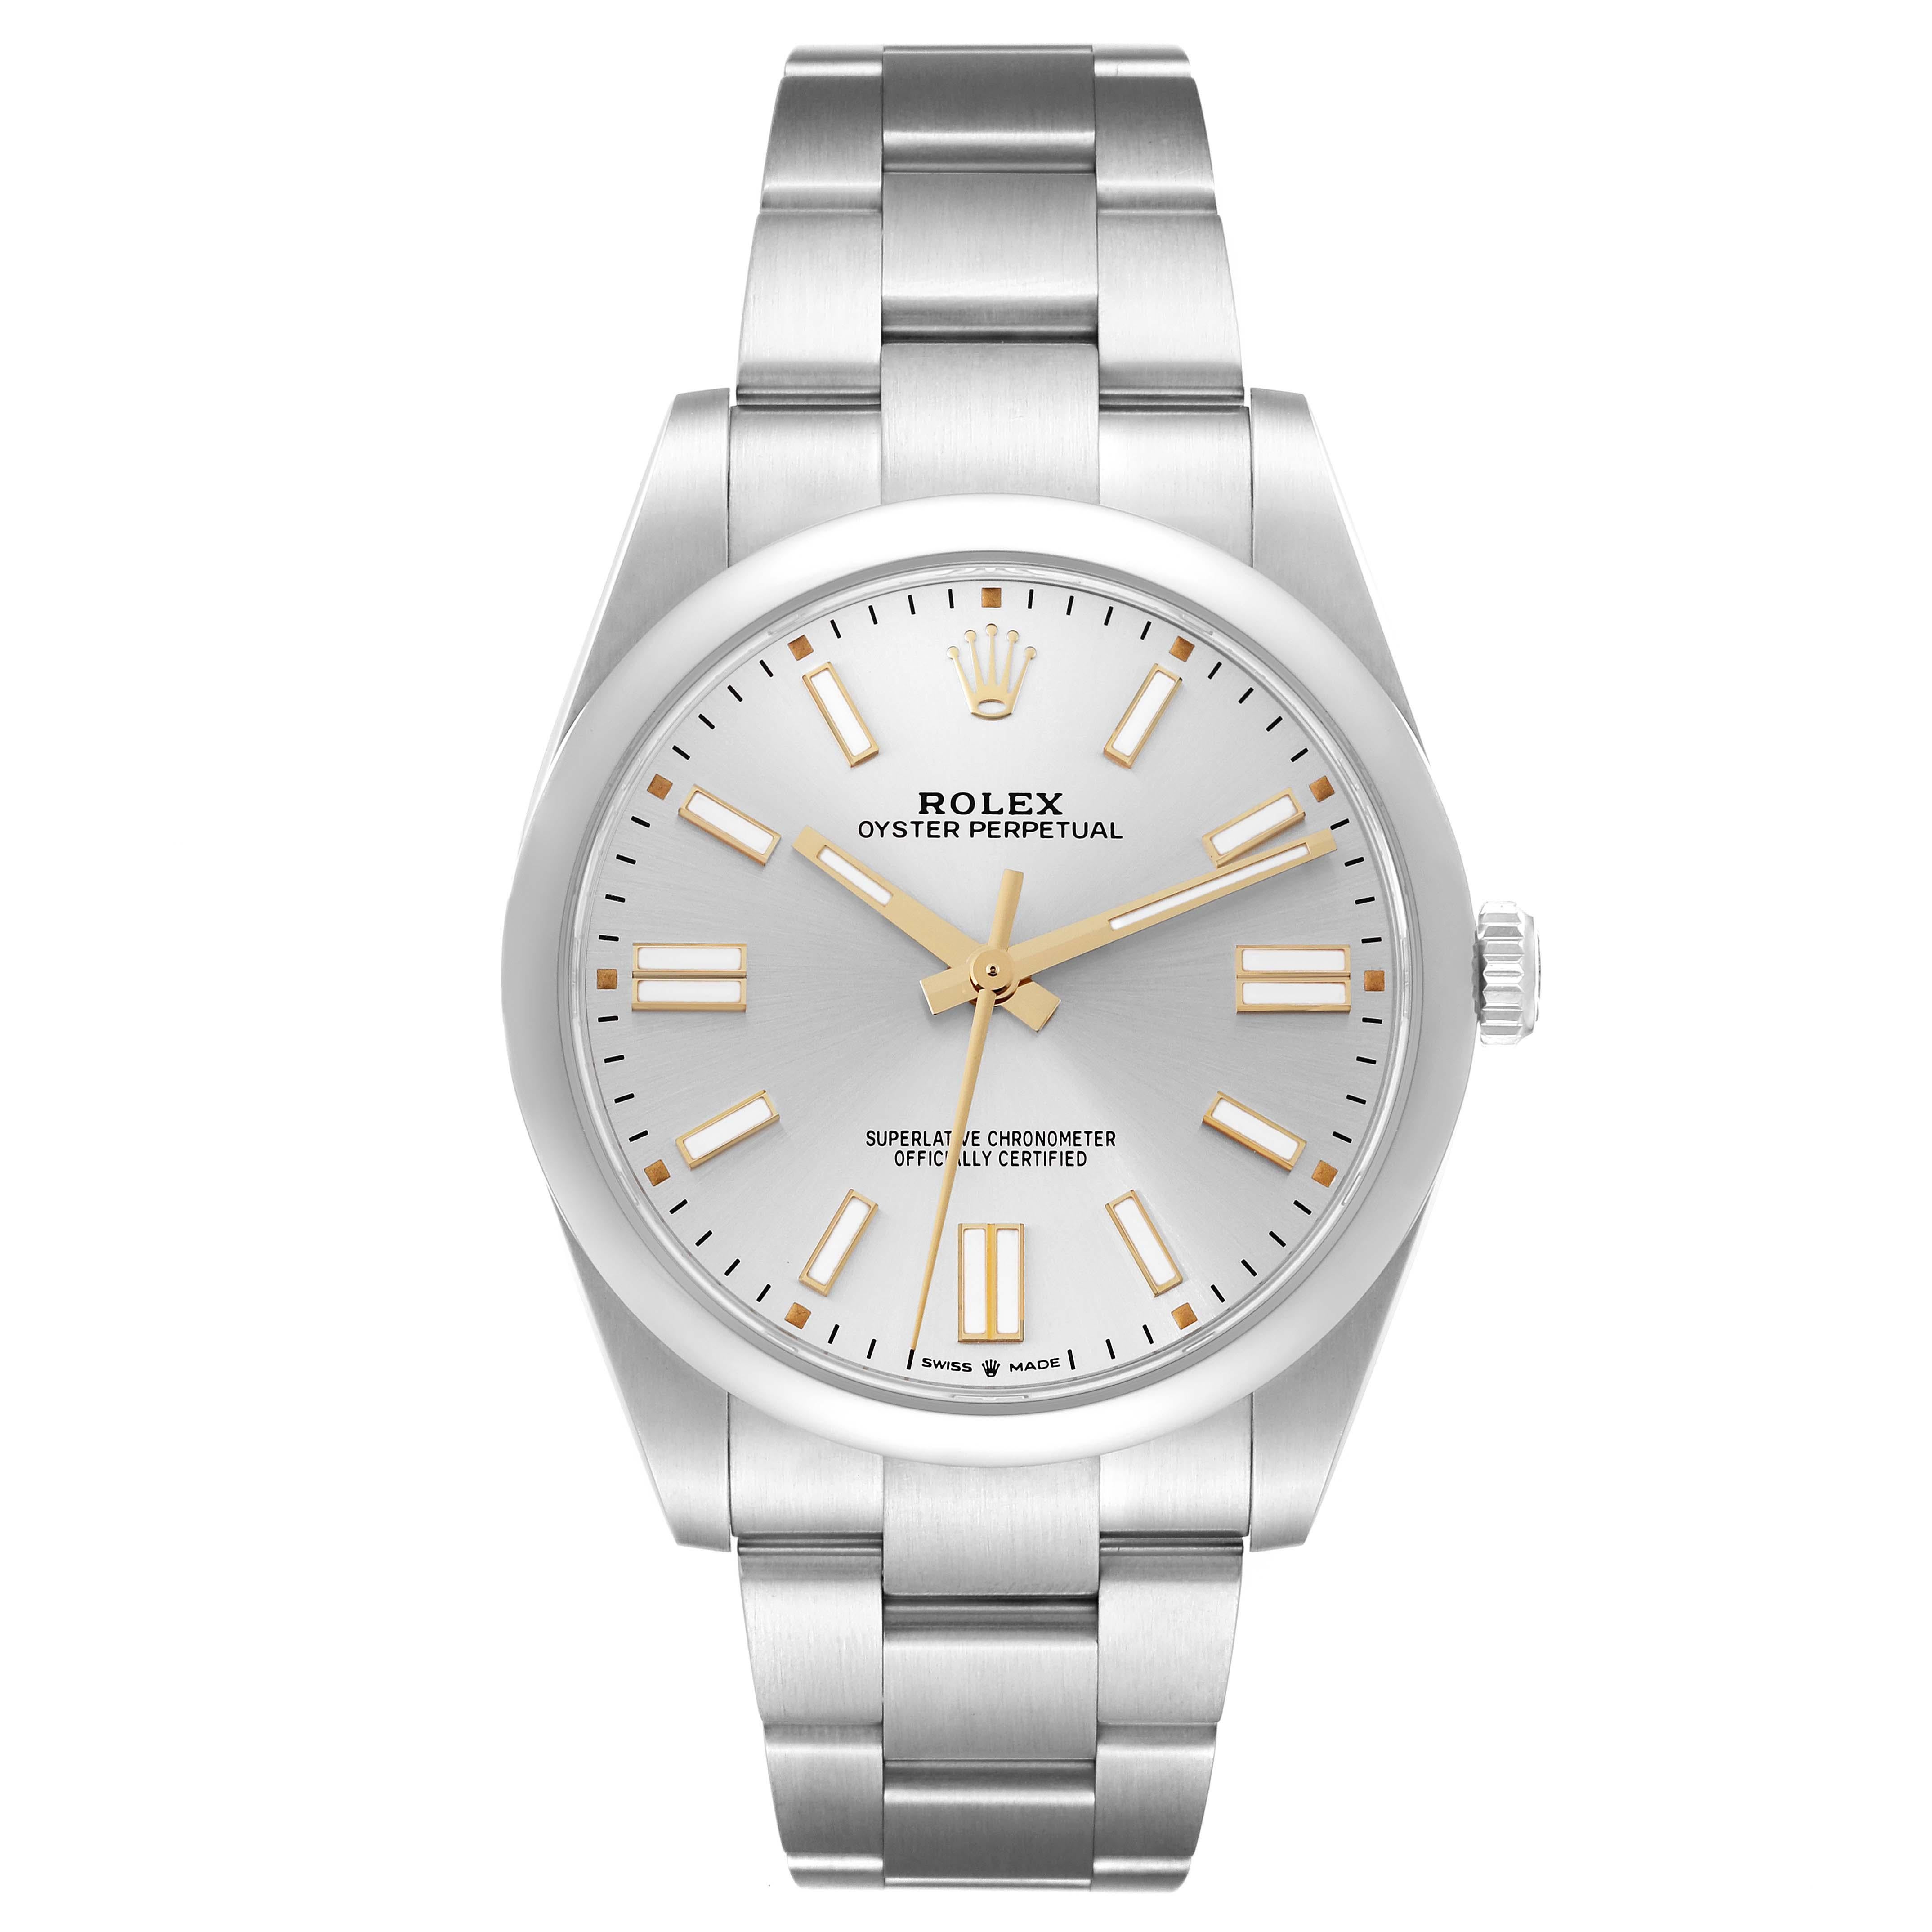 Rolex Oyster Perpetual 41 Silver Dial Steel Mens Watch 124300 Box Card. Officially certified chronometer automatic self-winding movement. Stainless steel case 41 mm in diameter. Rolex logo on the crown. Stainless steel smooth bezel. Scratch